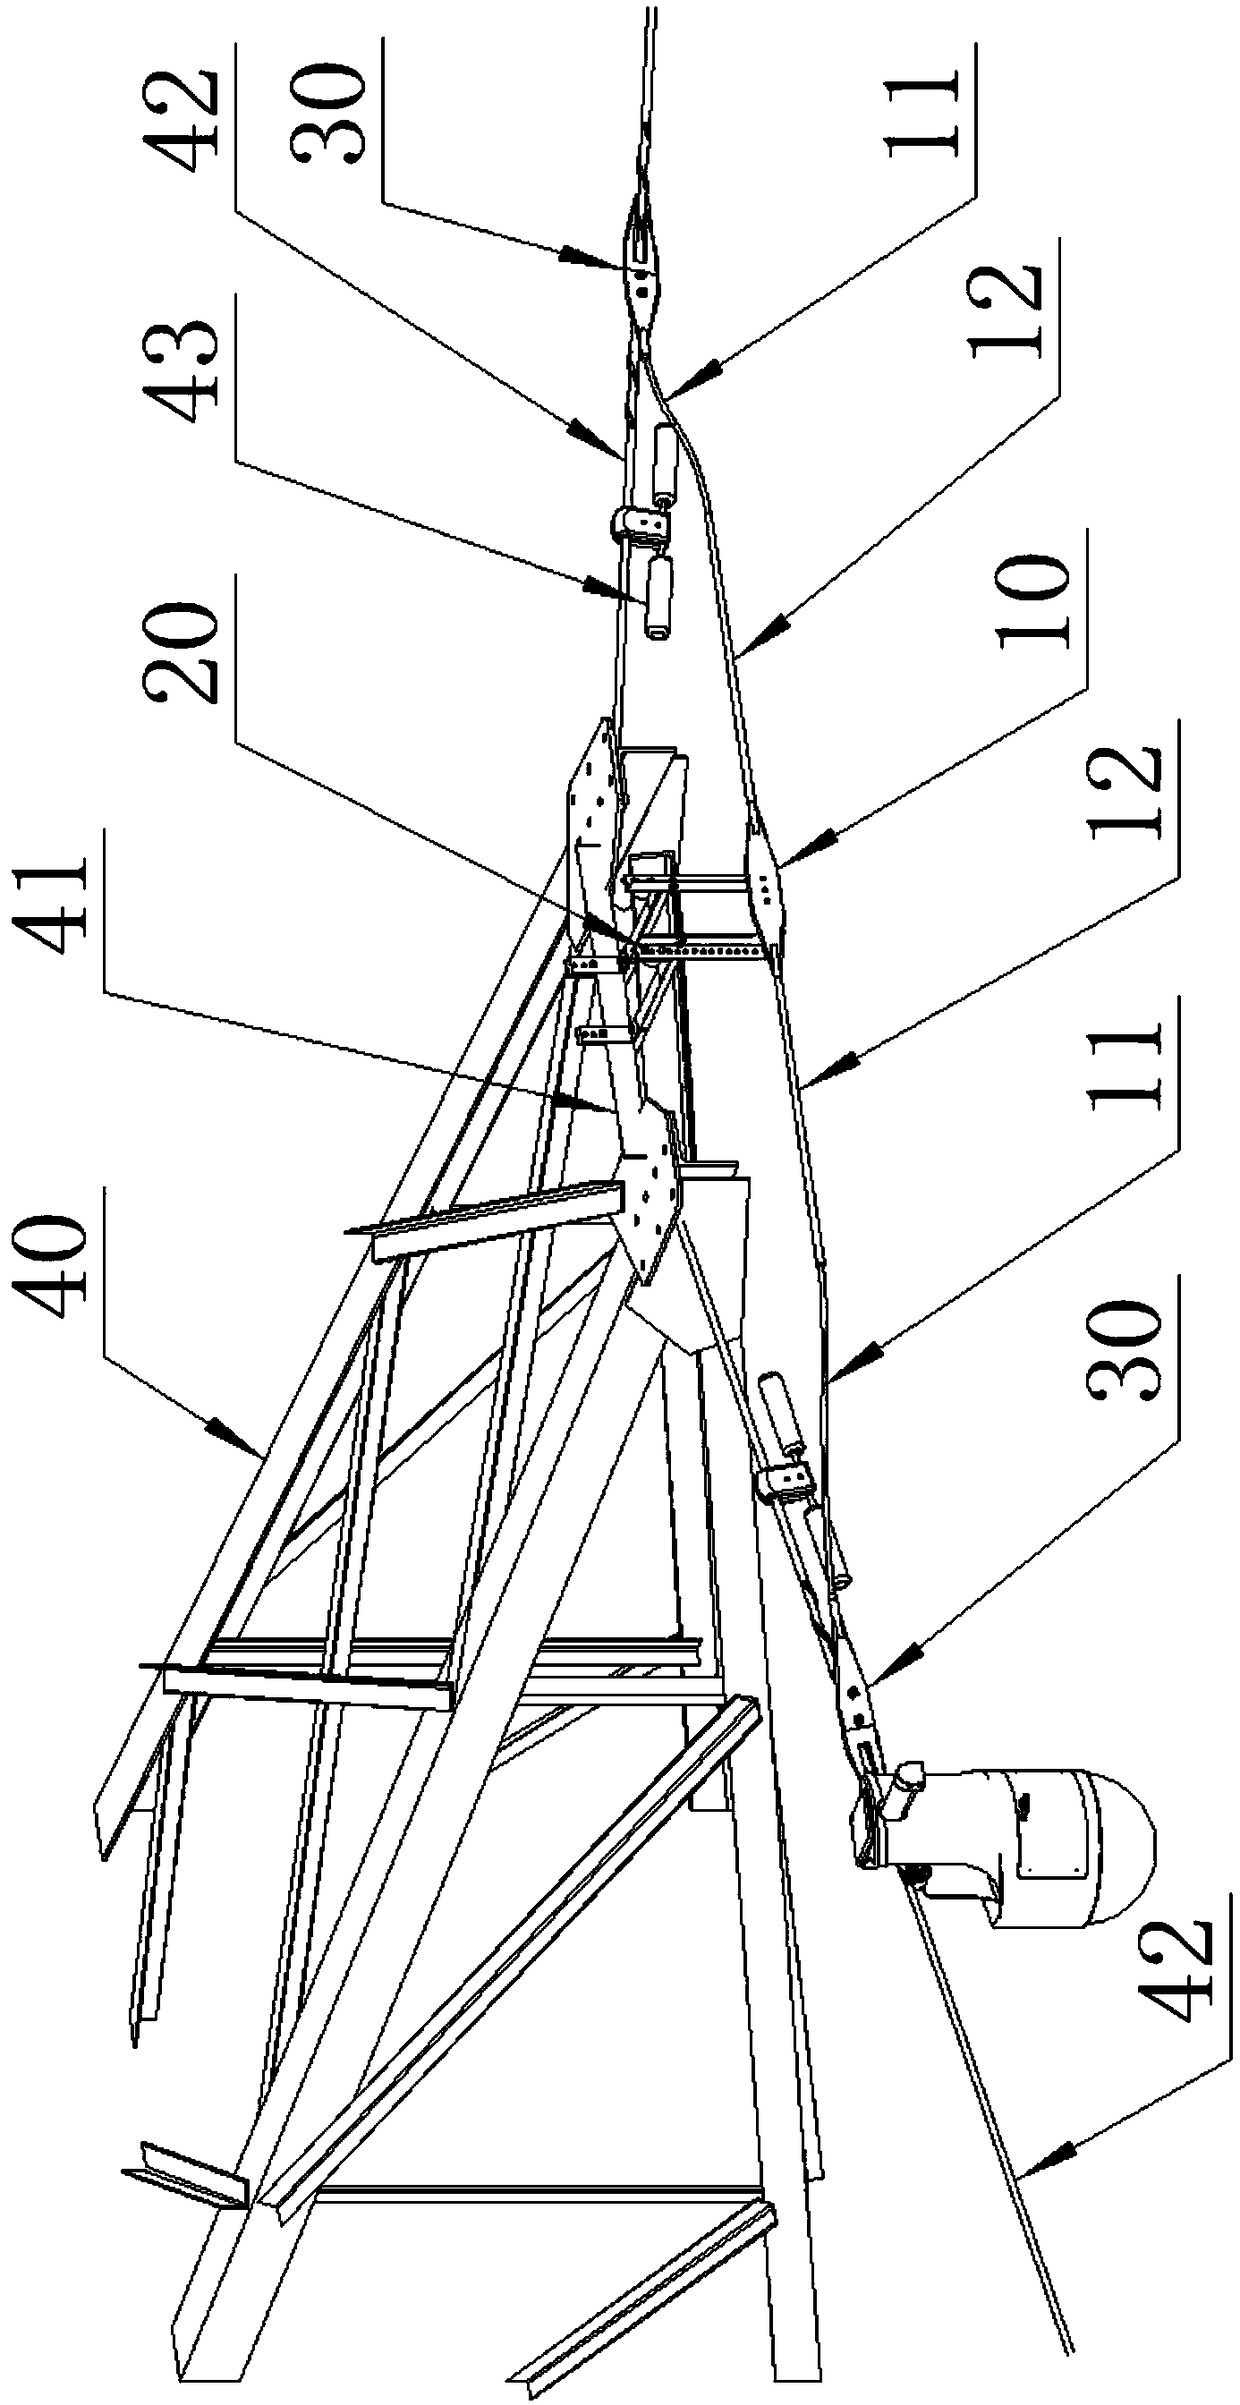 A tower obstacle-crossing bridge for an overhead transmission line wheeled patrol robot